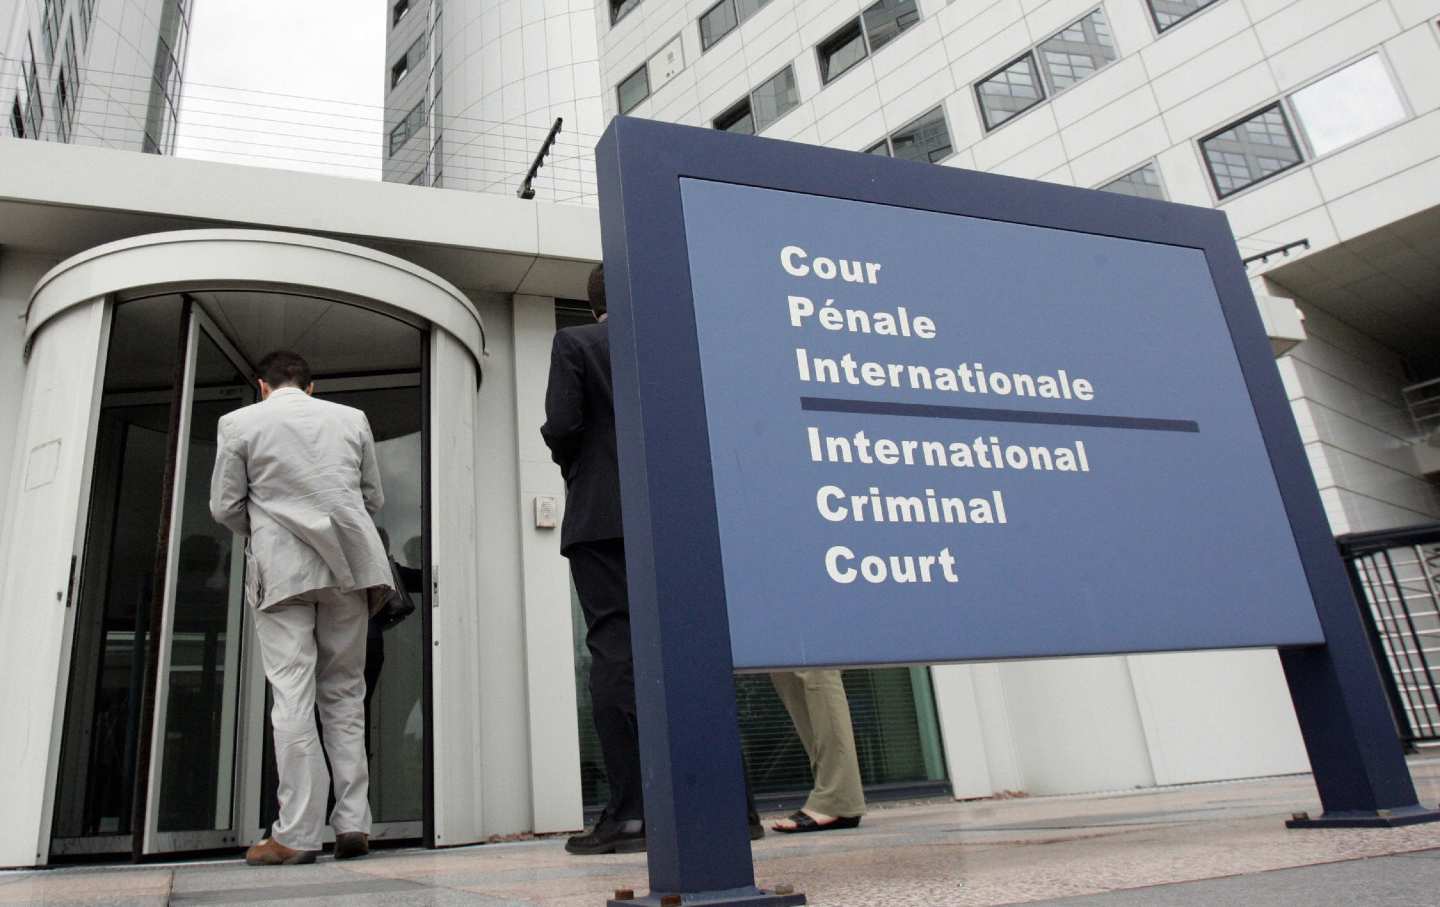 People enter the International Criminal Court at The Hague in the Netherlands.